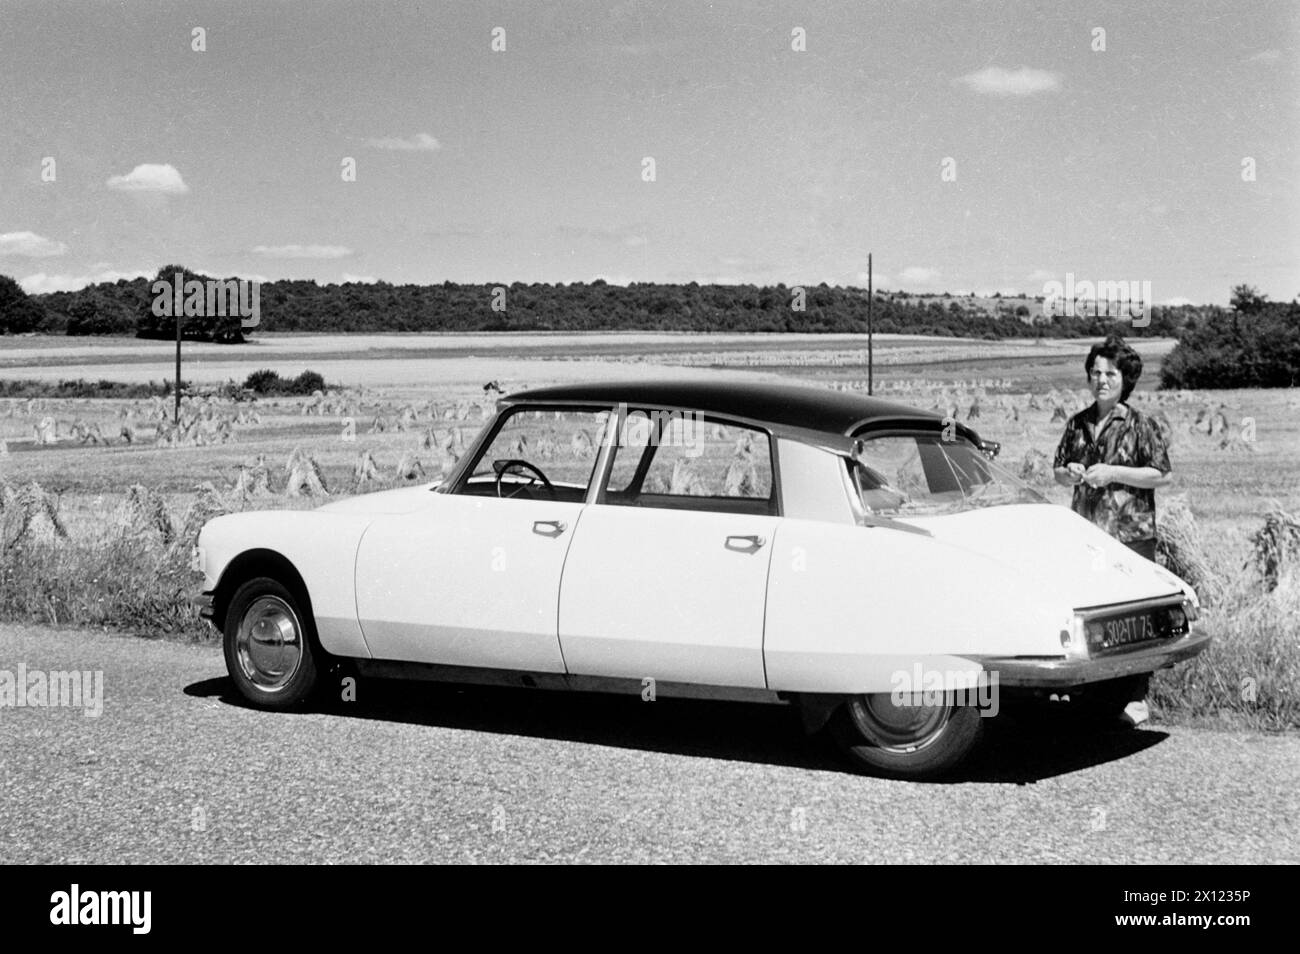 Citroën DS, manufactured 1955-1975, in Countryside Setting with Hay Hales & Woman, probably in Germany, Europe. Vintage or Historic Monochrome or Black and White Image c1960. Stock Photo